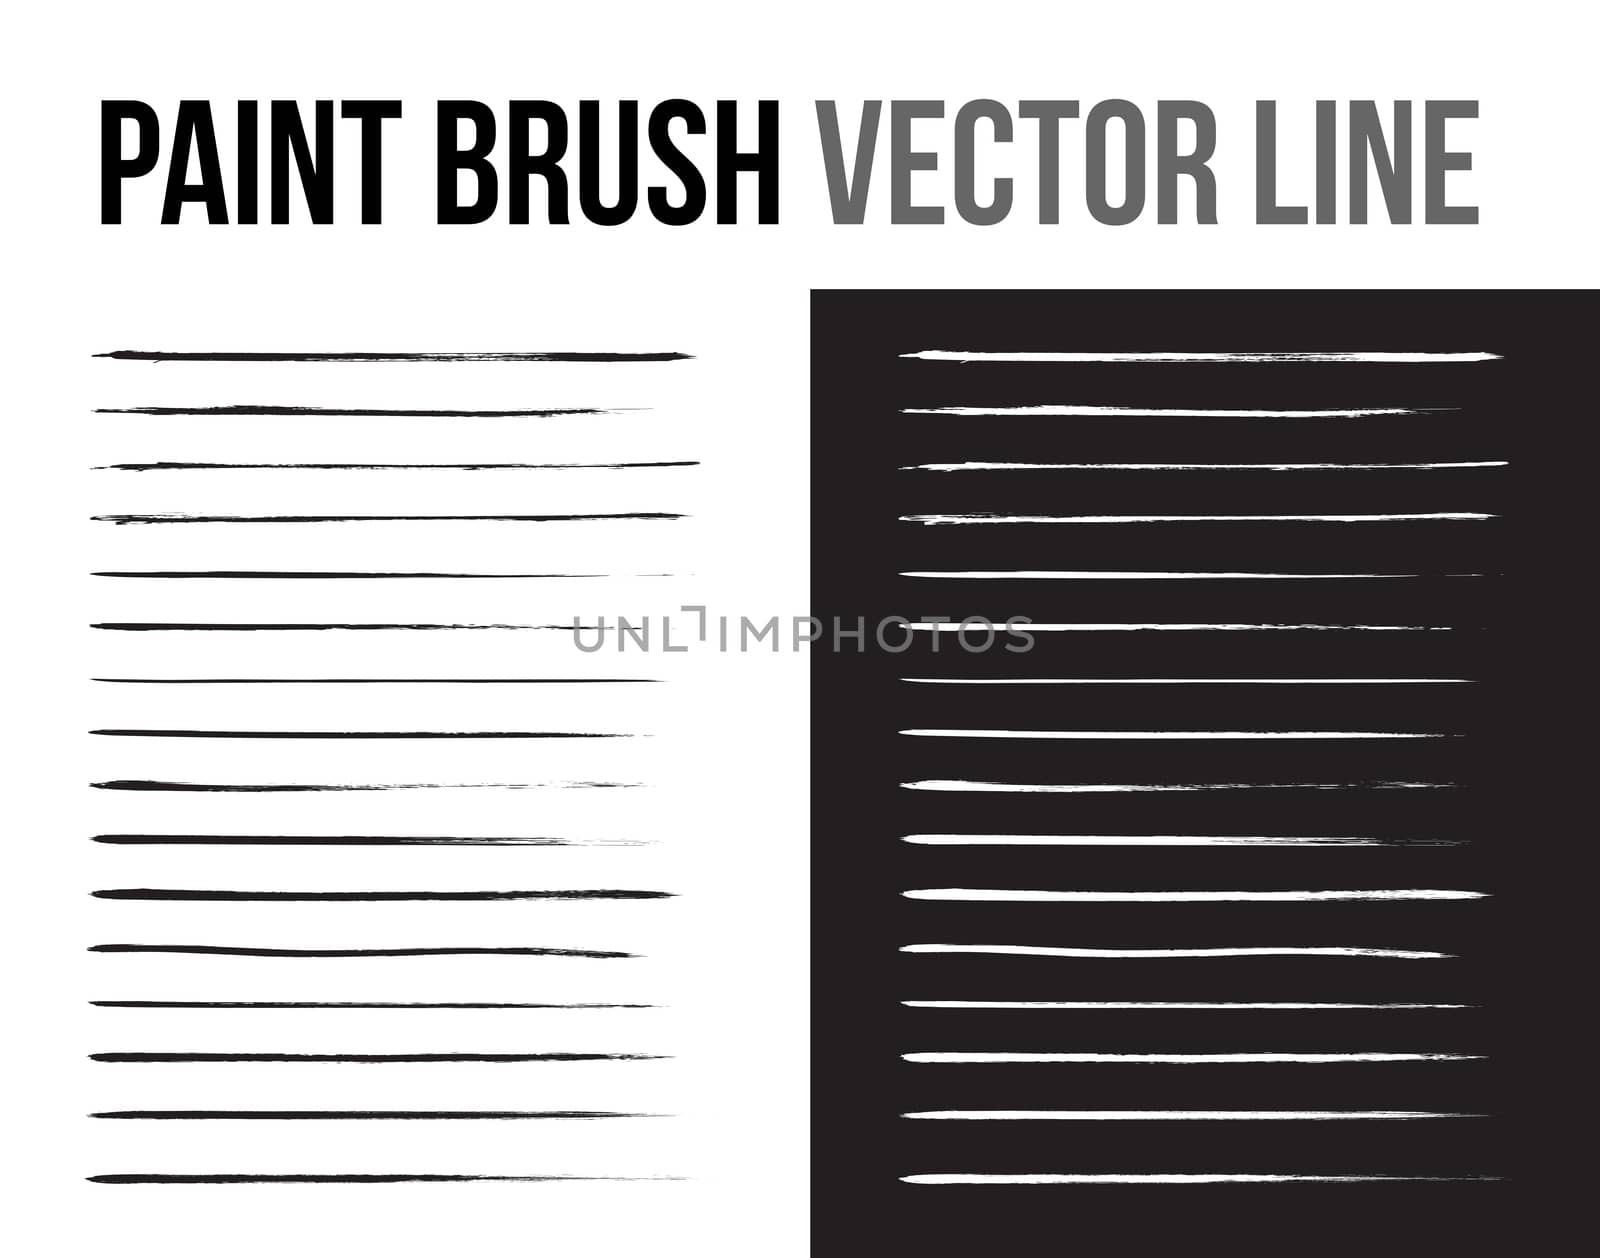 The paint brush handdrawn vector line set  by cougarsan